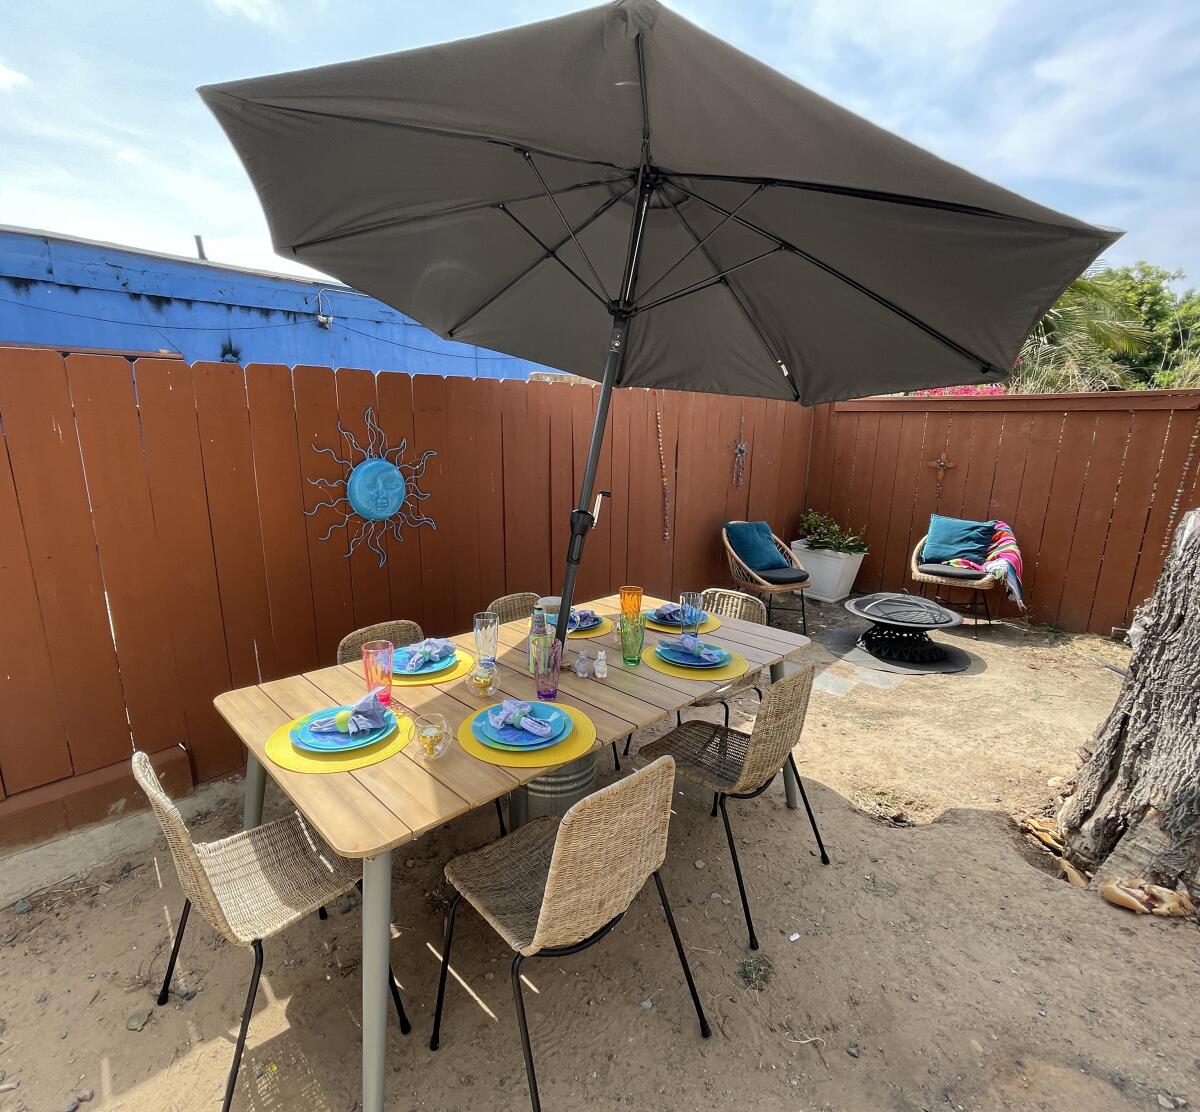 The Ibarras’ backyard has a patio dining set with umbrella and chairs around a fire pit.